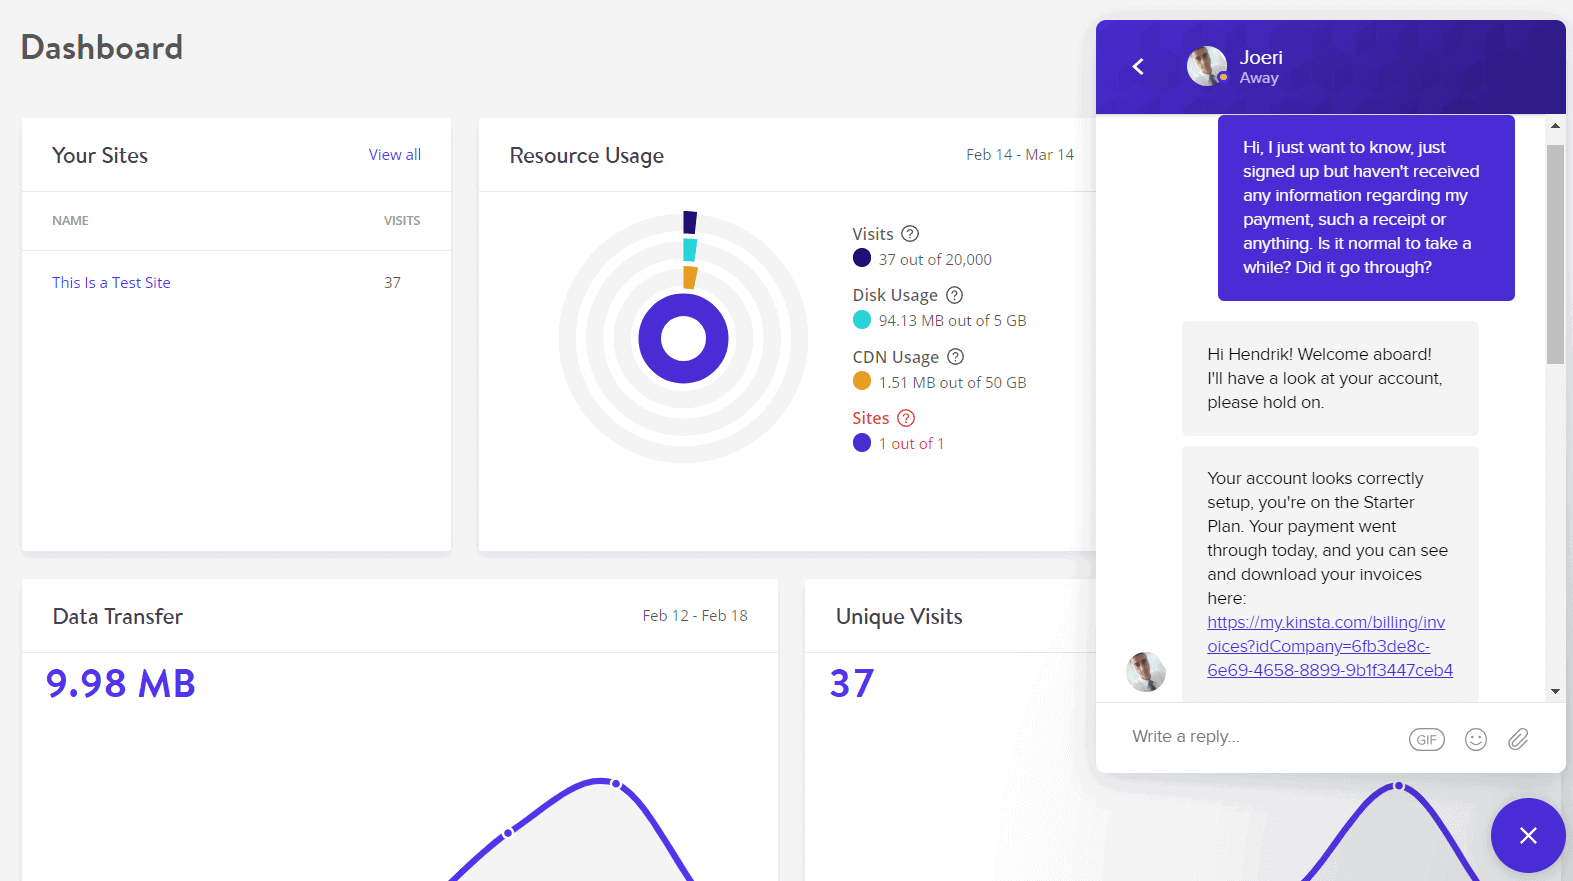 [Kinsta] - [support chat]